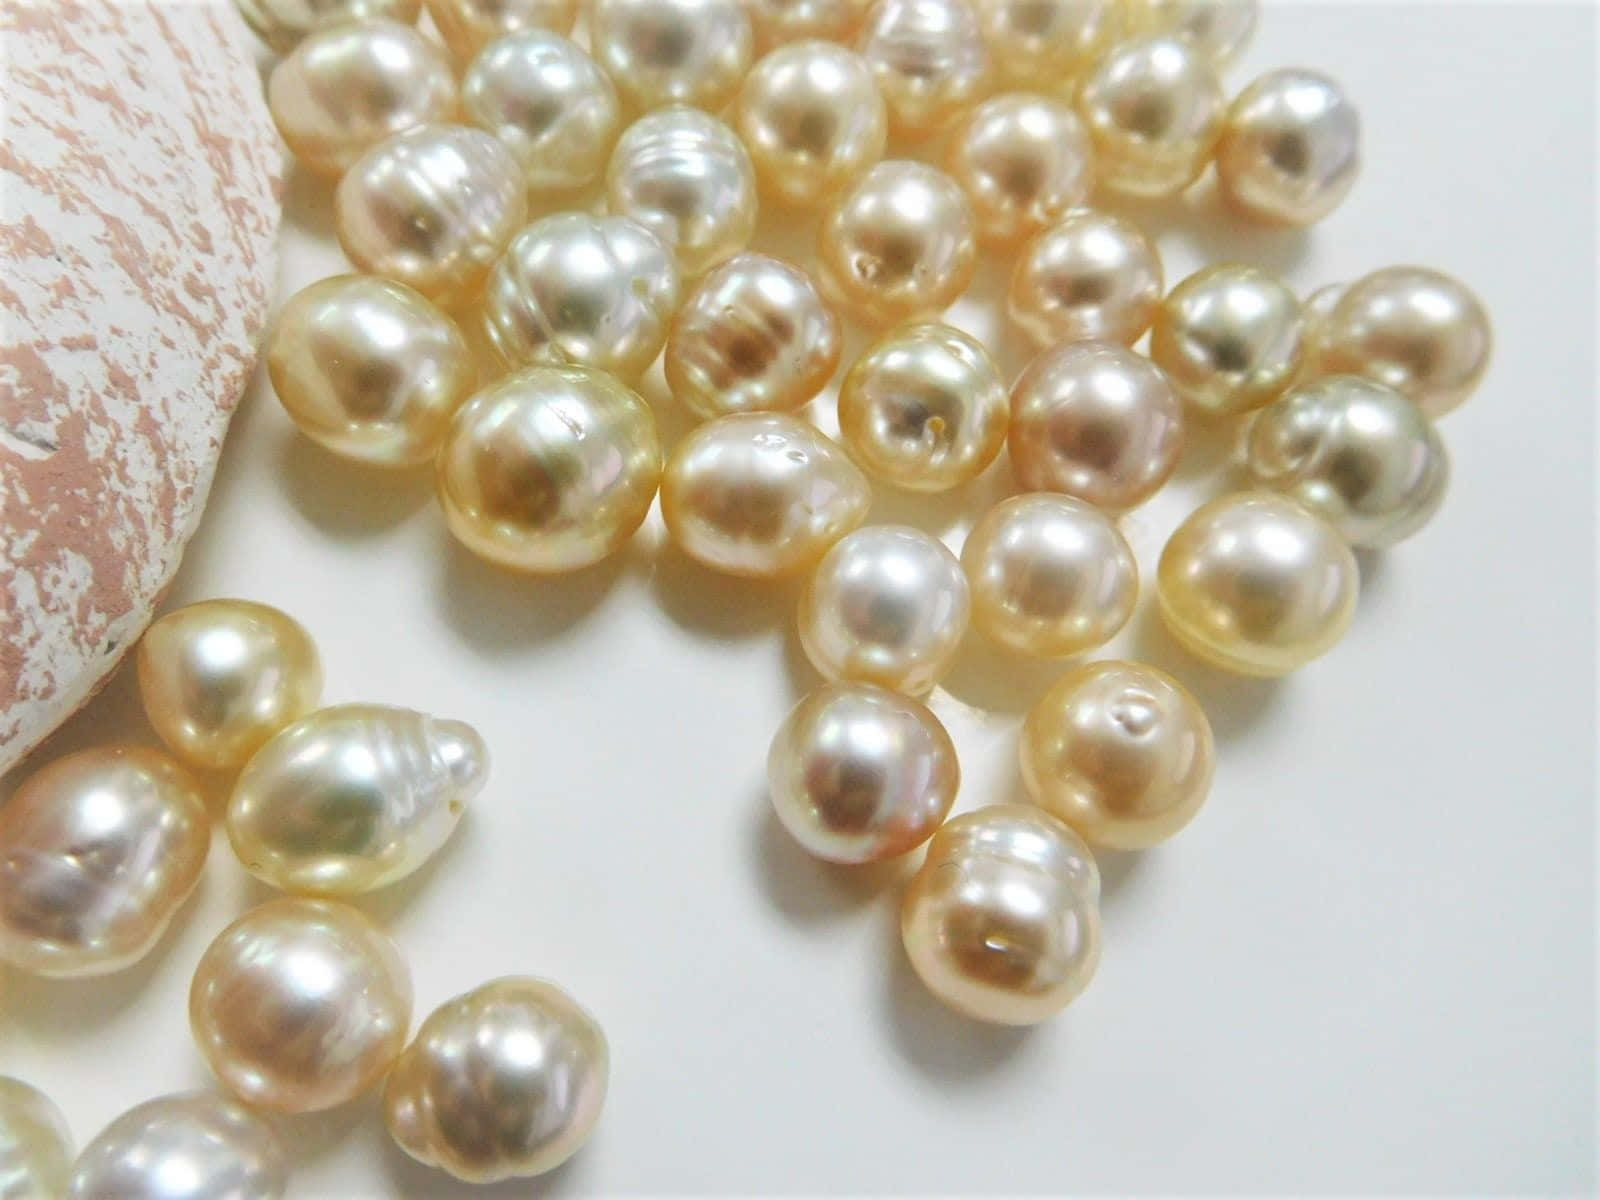 A Pile Of Pearls On A White Surface